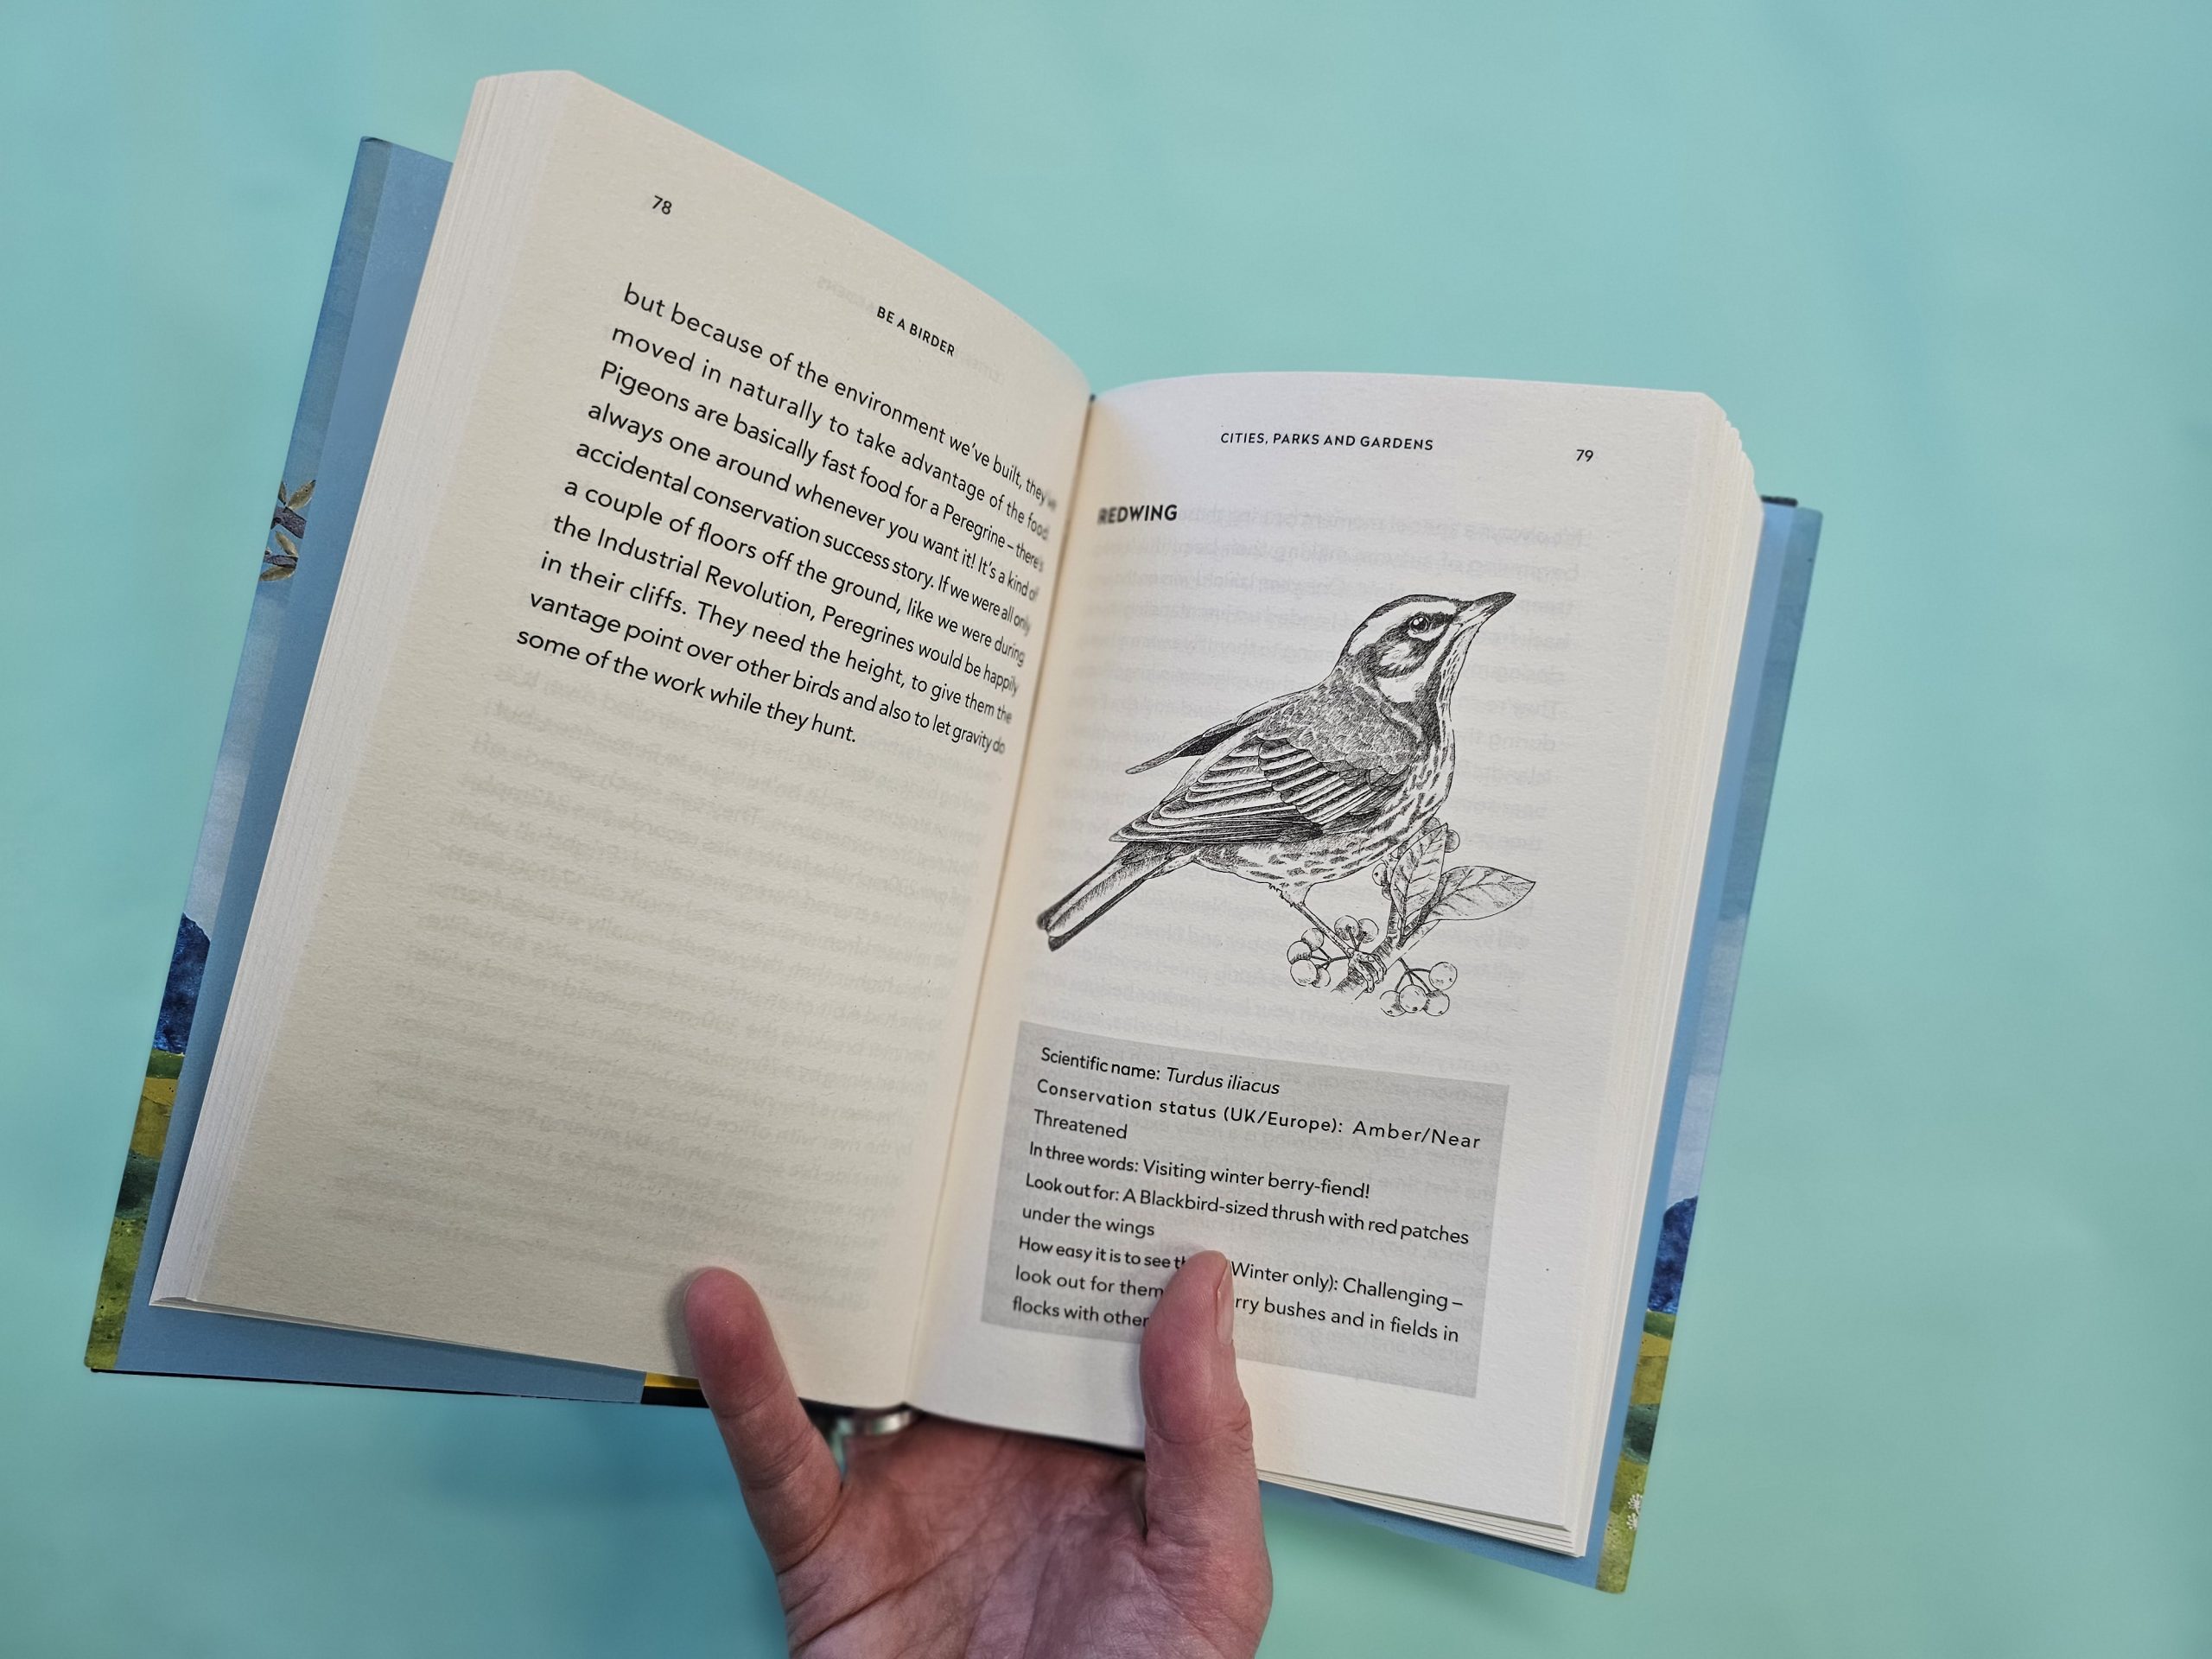 Be A Birder by Hamza Yassin opened at a page with an illustration of a bird.